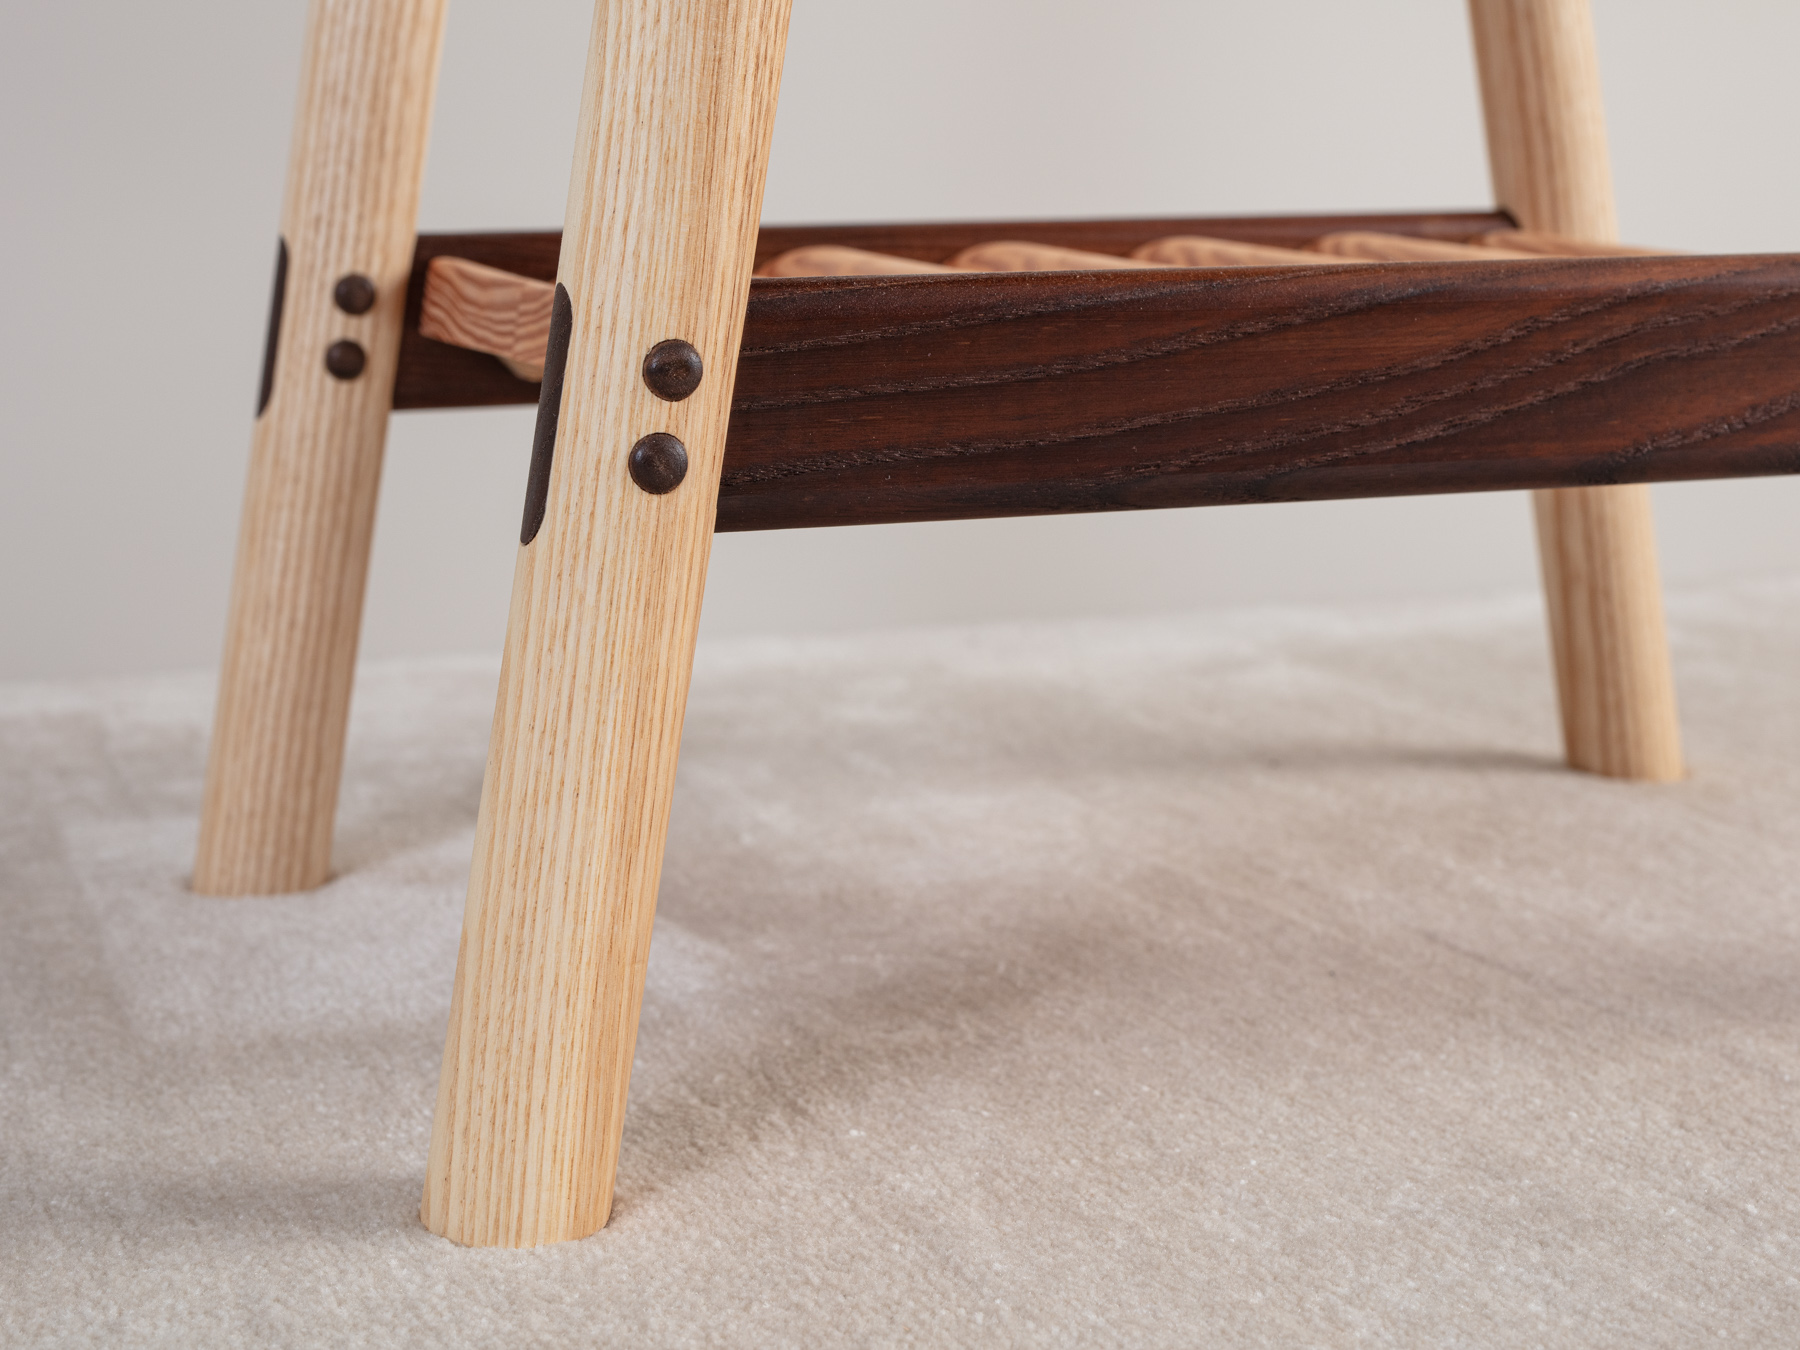 A four-legged table with hand turned dowel sections. Mortice and tenon rails, with accentuated dowel button detailing. A tippled Douglas fir shelf below accentuates the timber's stunning natural grain detail.